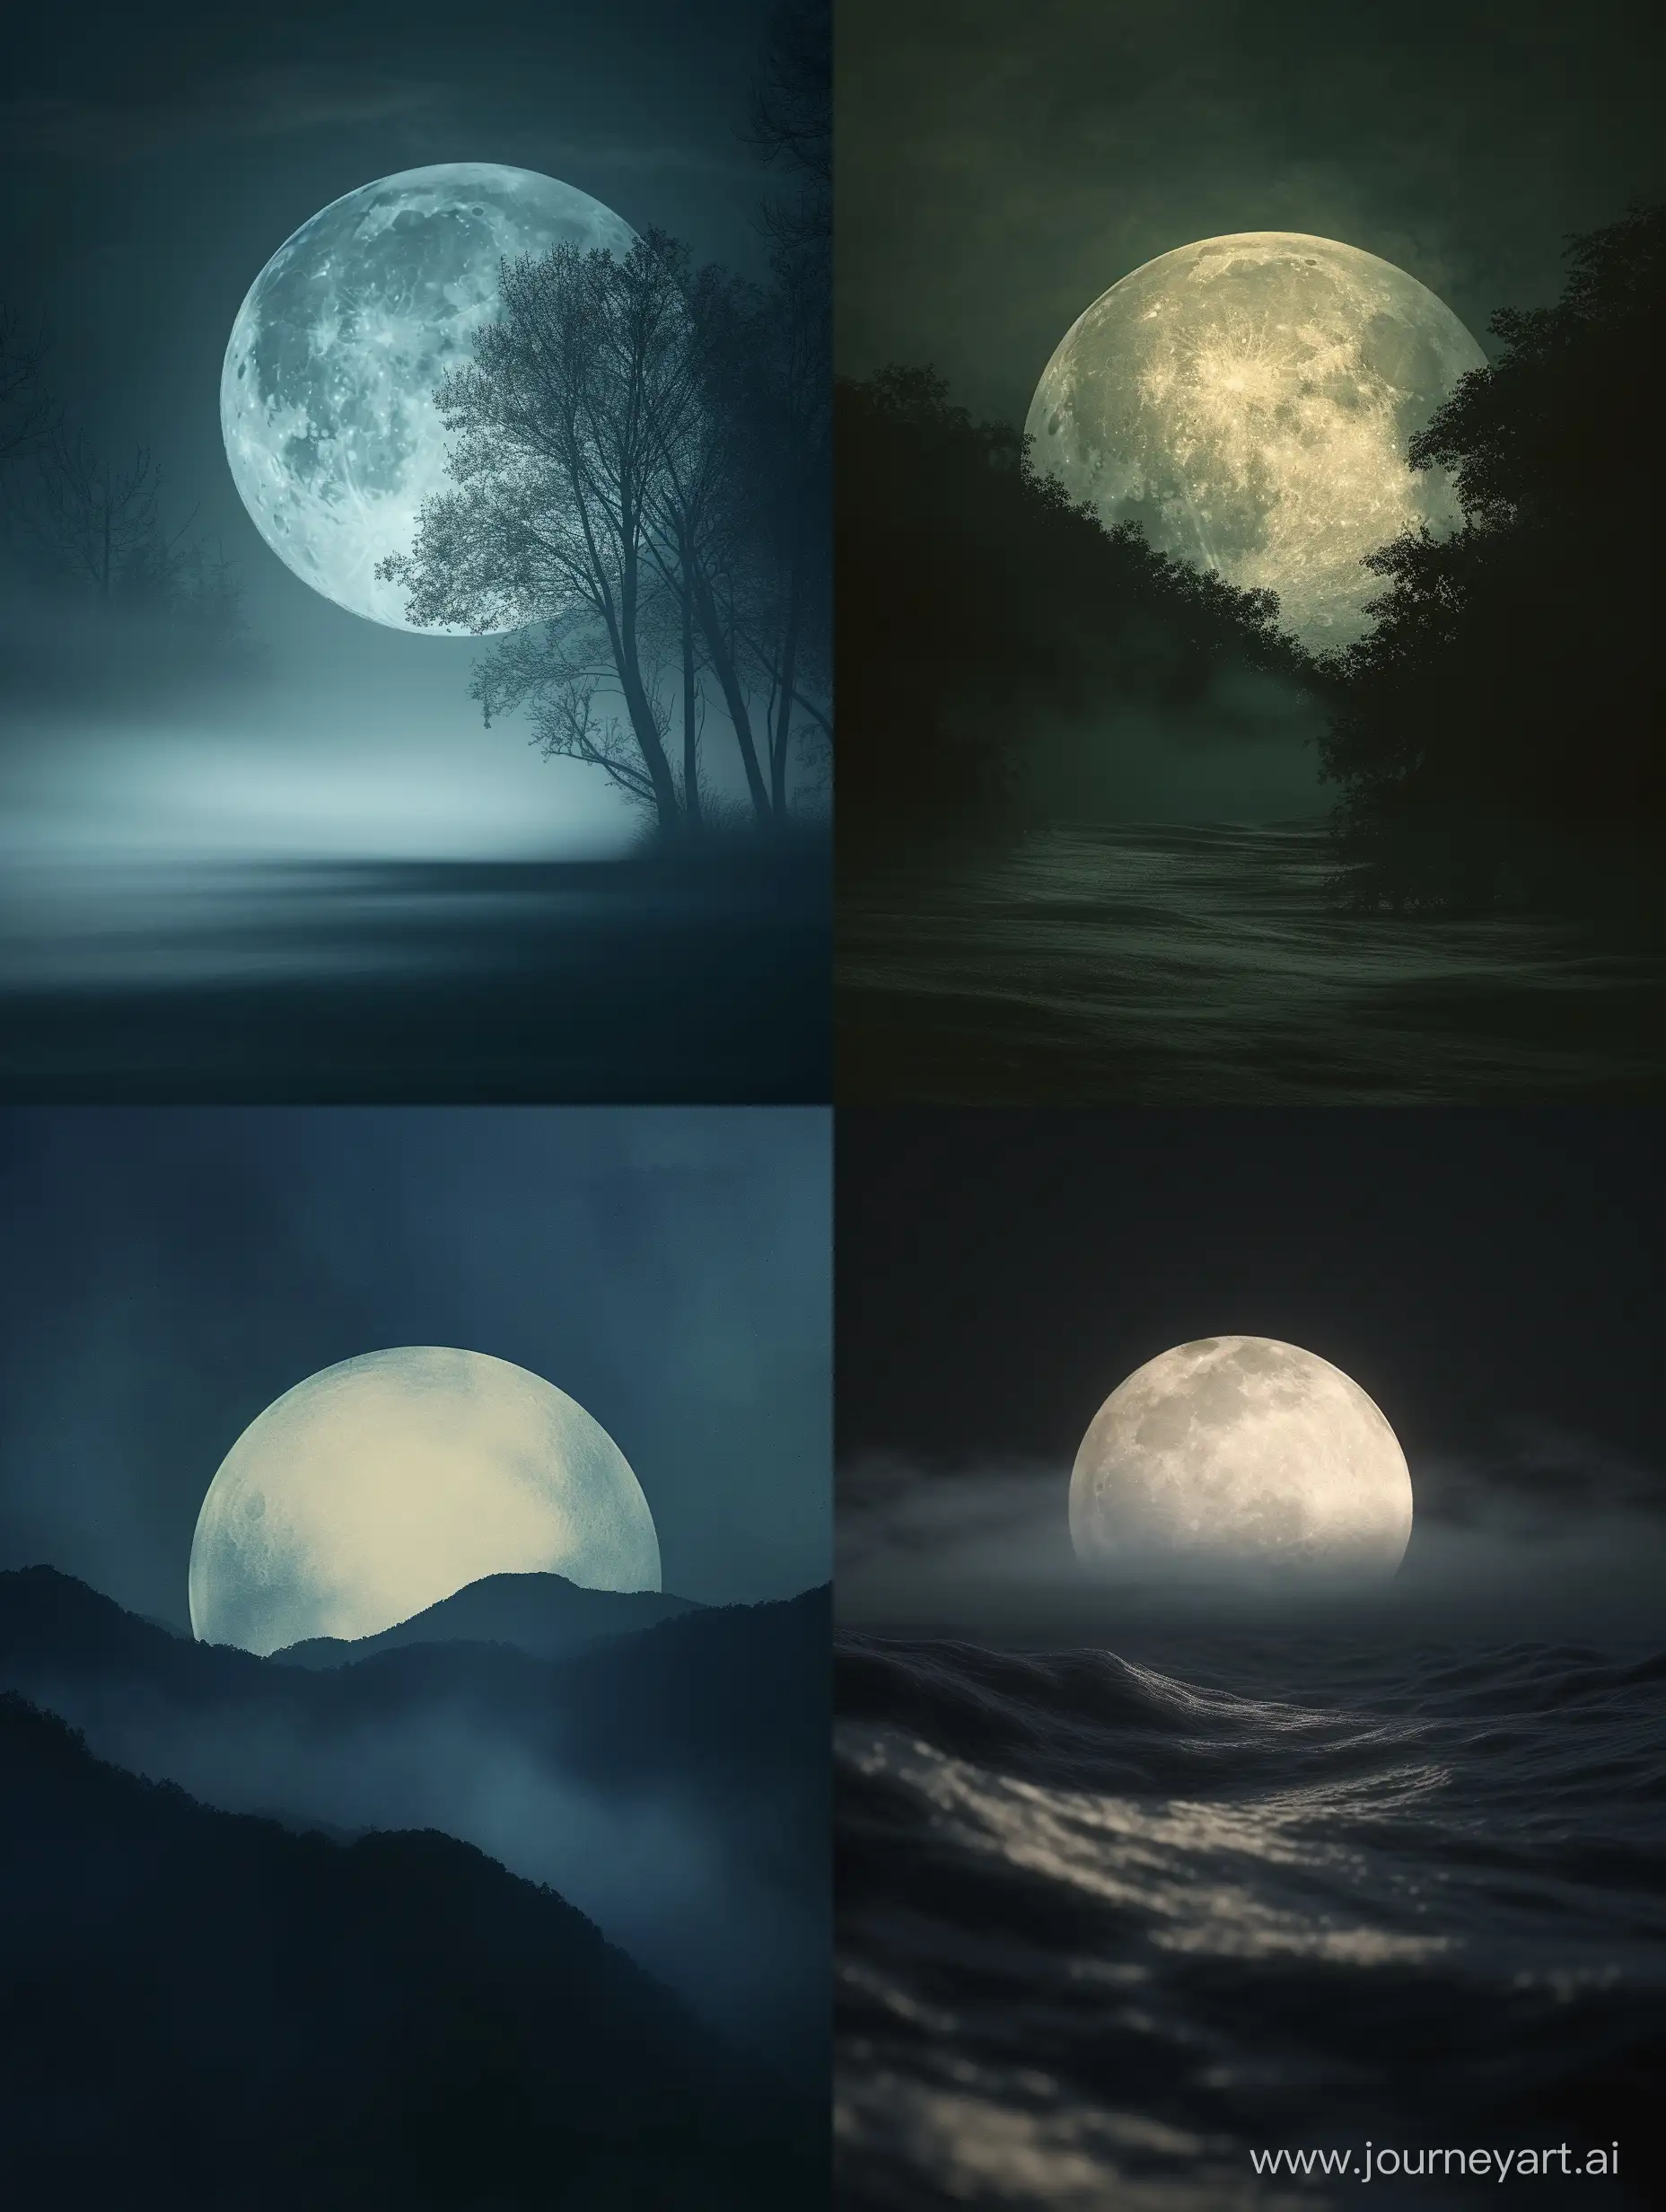 A night landscape where a full moon is obscured by subtle shadows.- Visual Filters: Action Film Look-Up Table (LUT)
- Camera Effects: Camera Blur, Camera Haze
- Time: Night time theme
- Resolution: High
- Aspect Ratio: 4:5 (vertical)